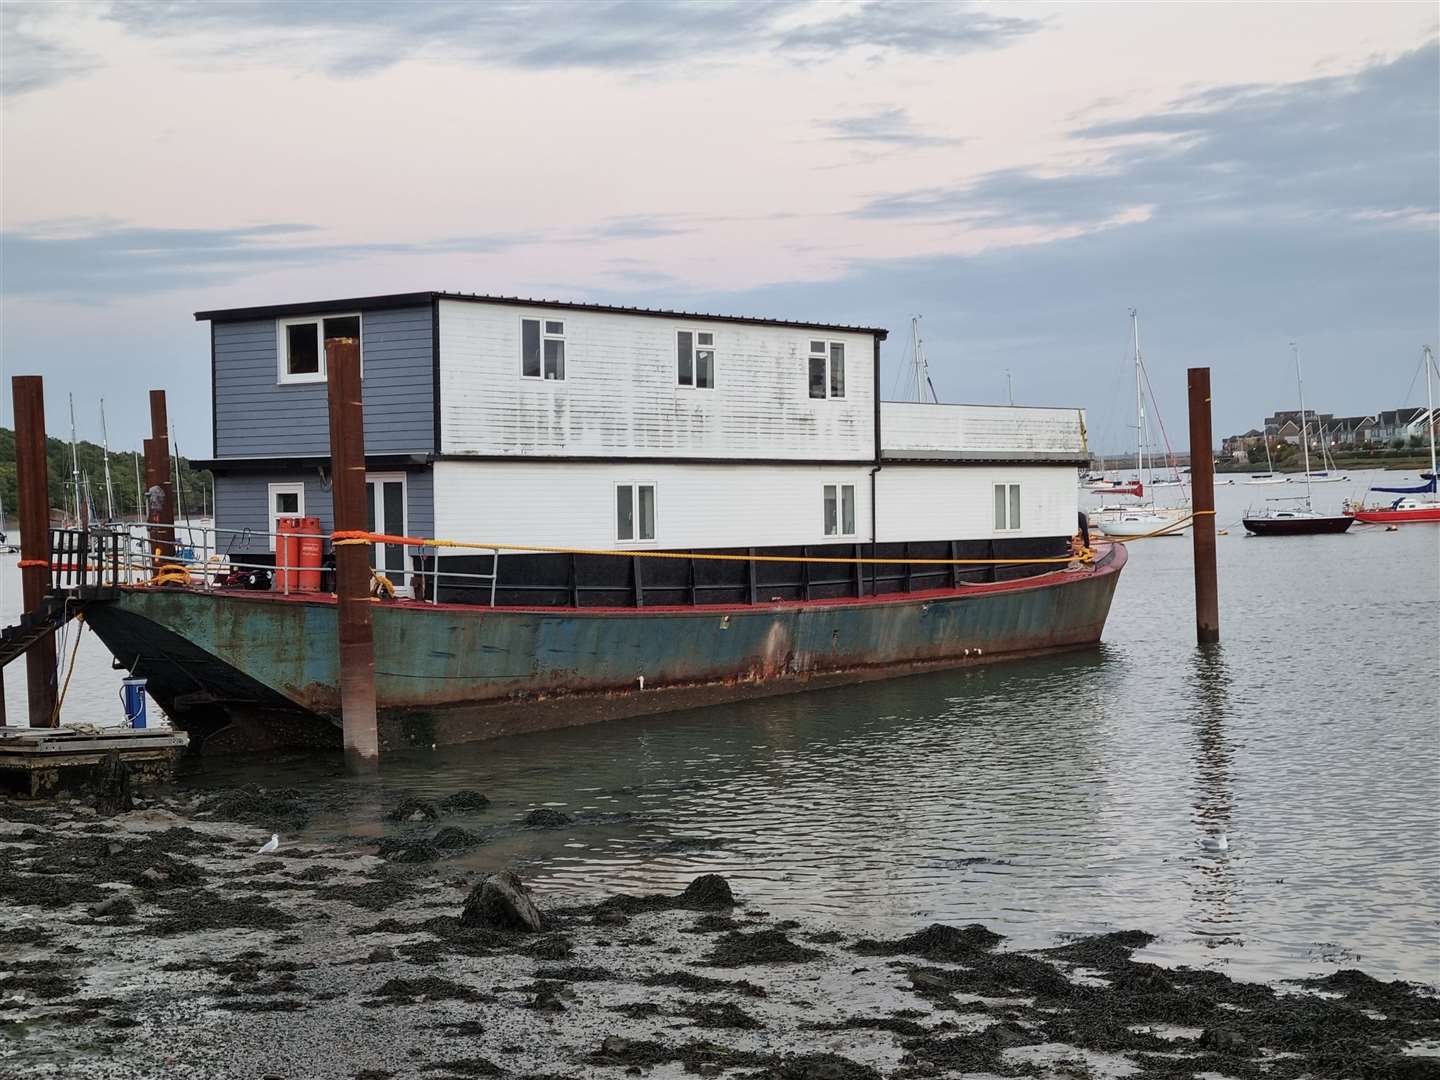 Residents in Lower Upnor are outraged at the houseboat blighting the views of the historic village